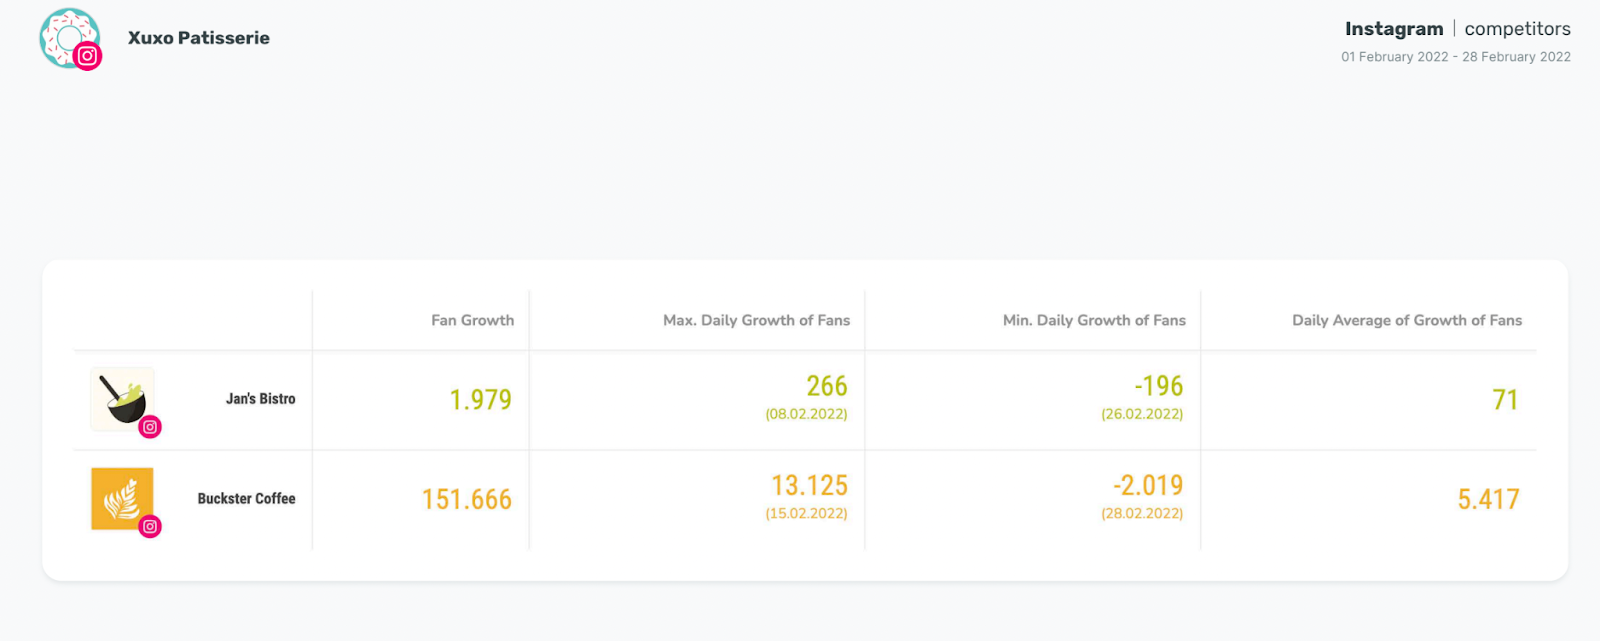 Competitor analysis report example - Growth Rate Summary Bar